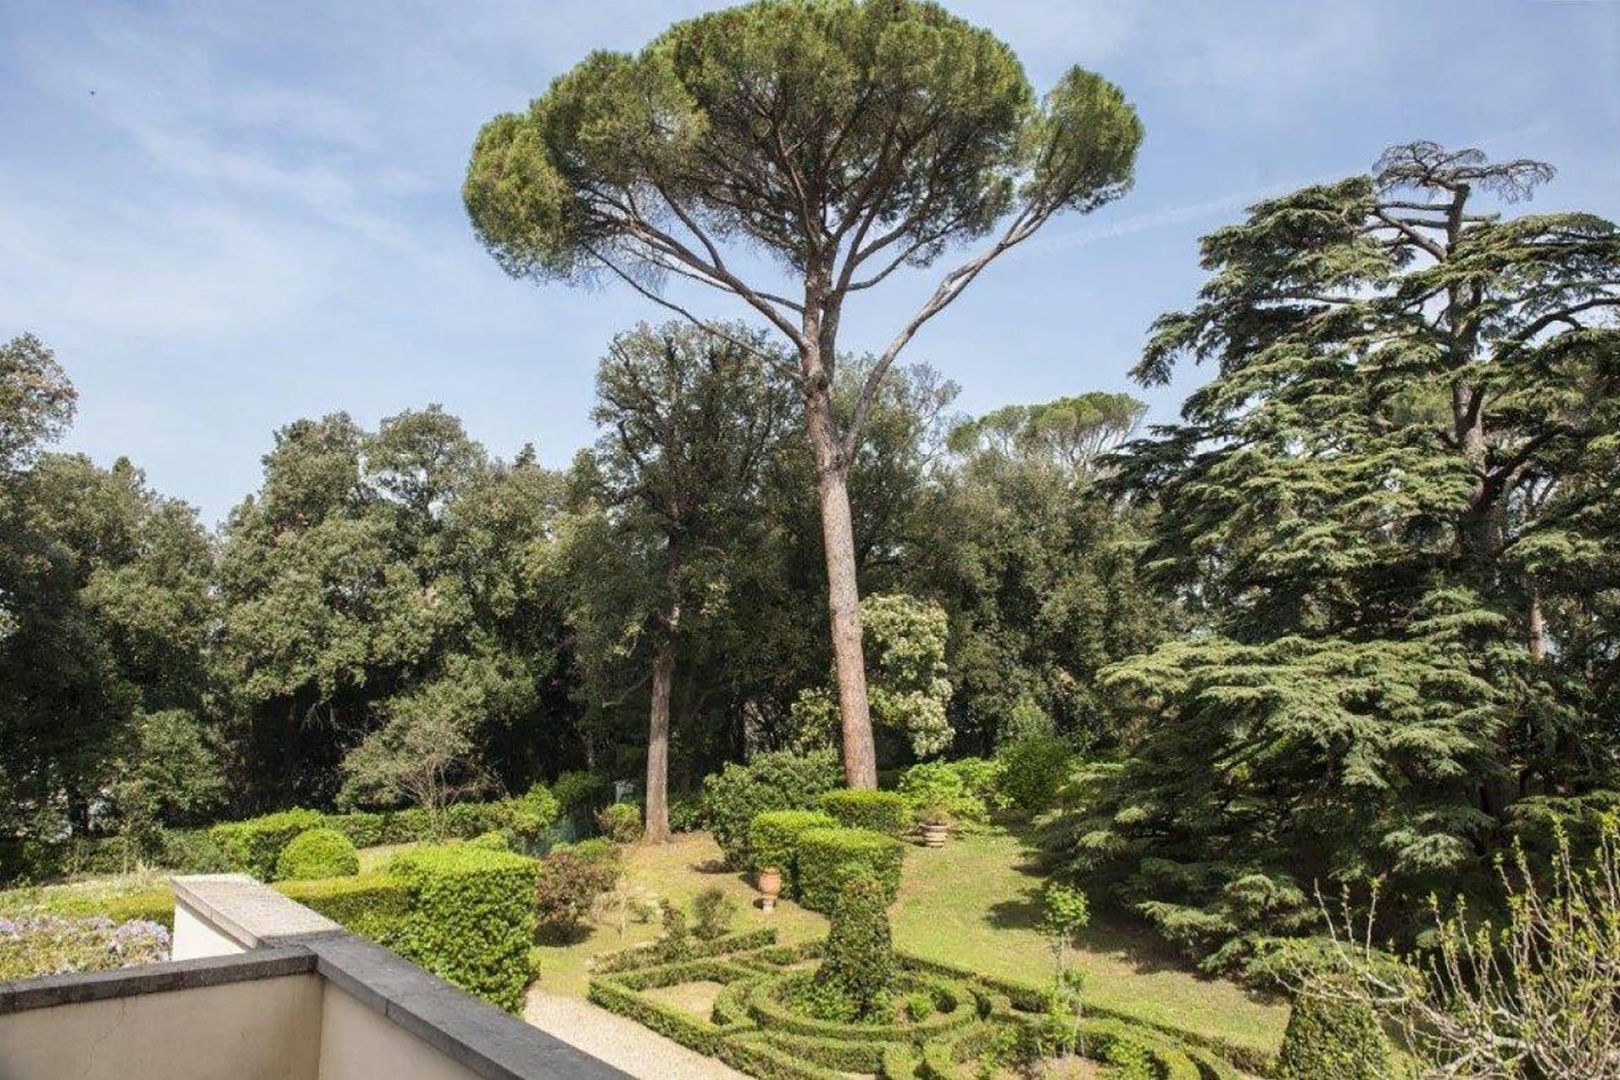 Well-manicured garden and umbrella pines so characteristic of Italy.